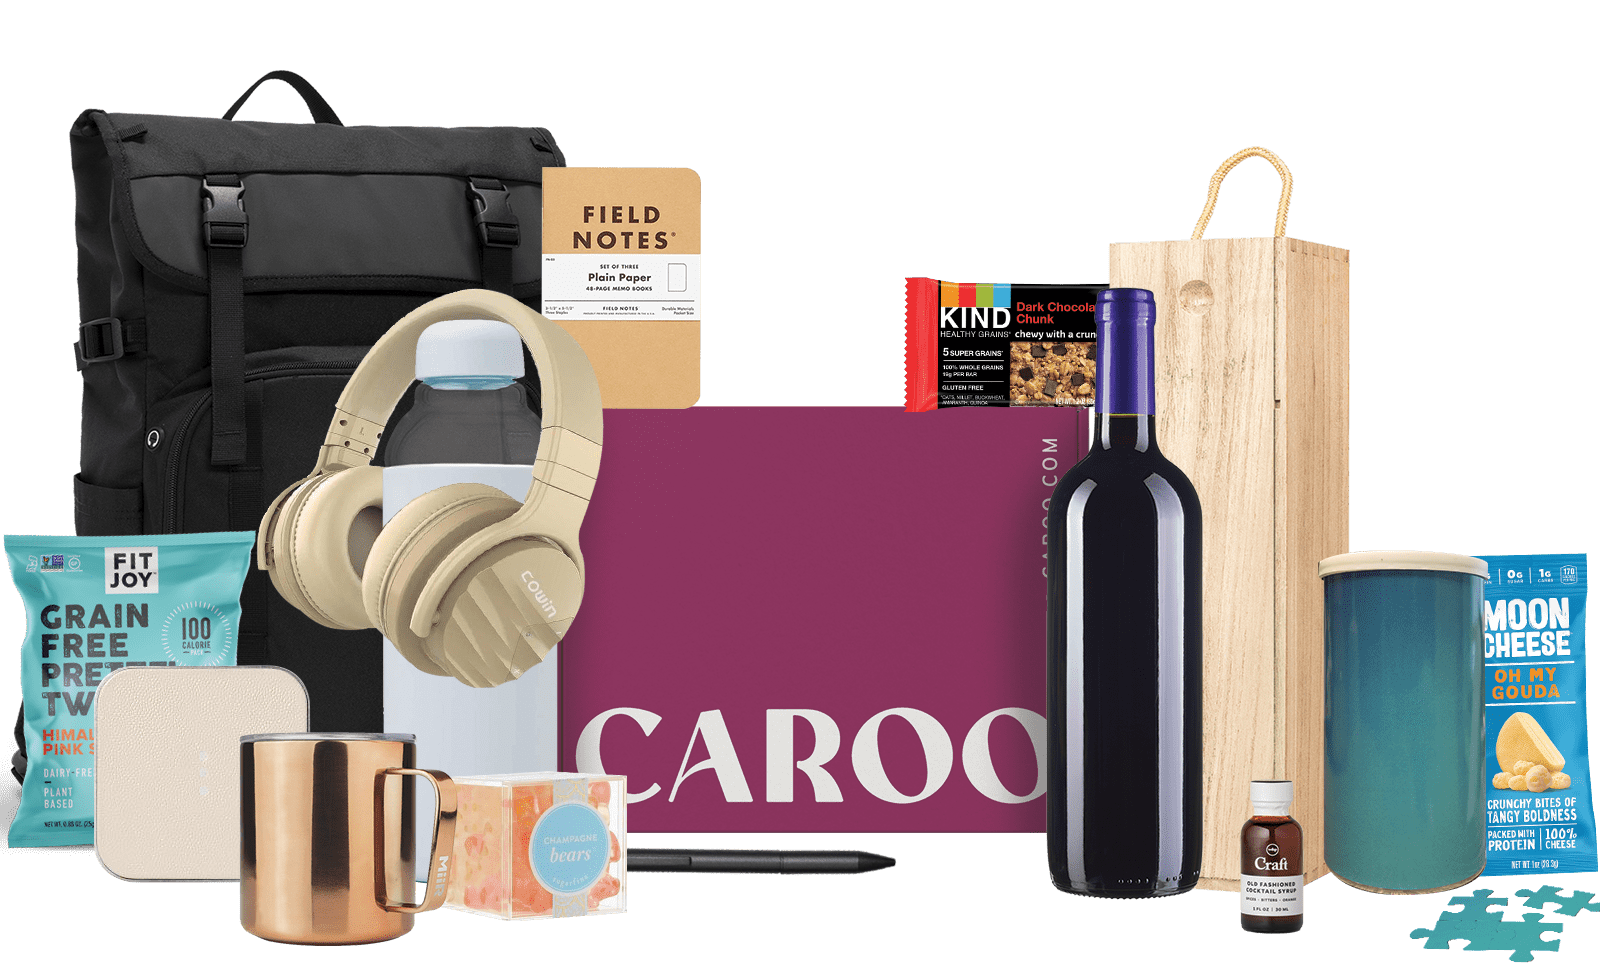 Types of Corporate Gifts That You Can Send Out